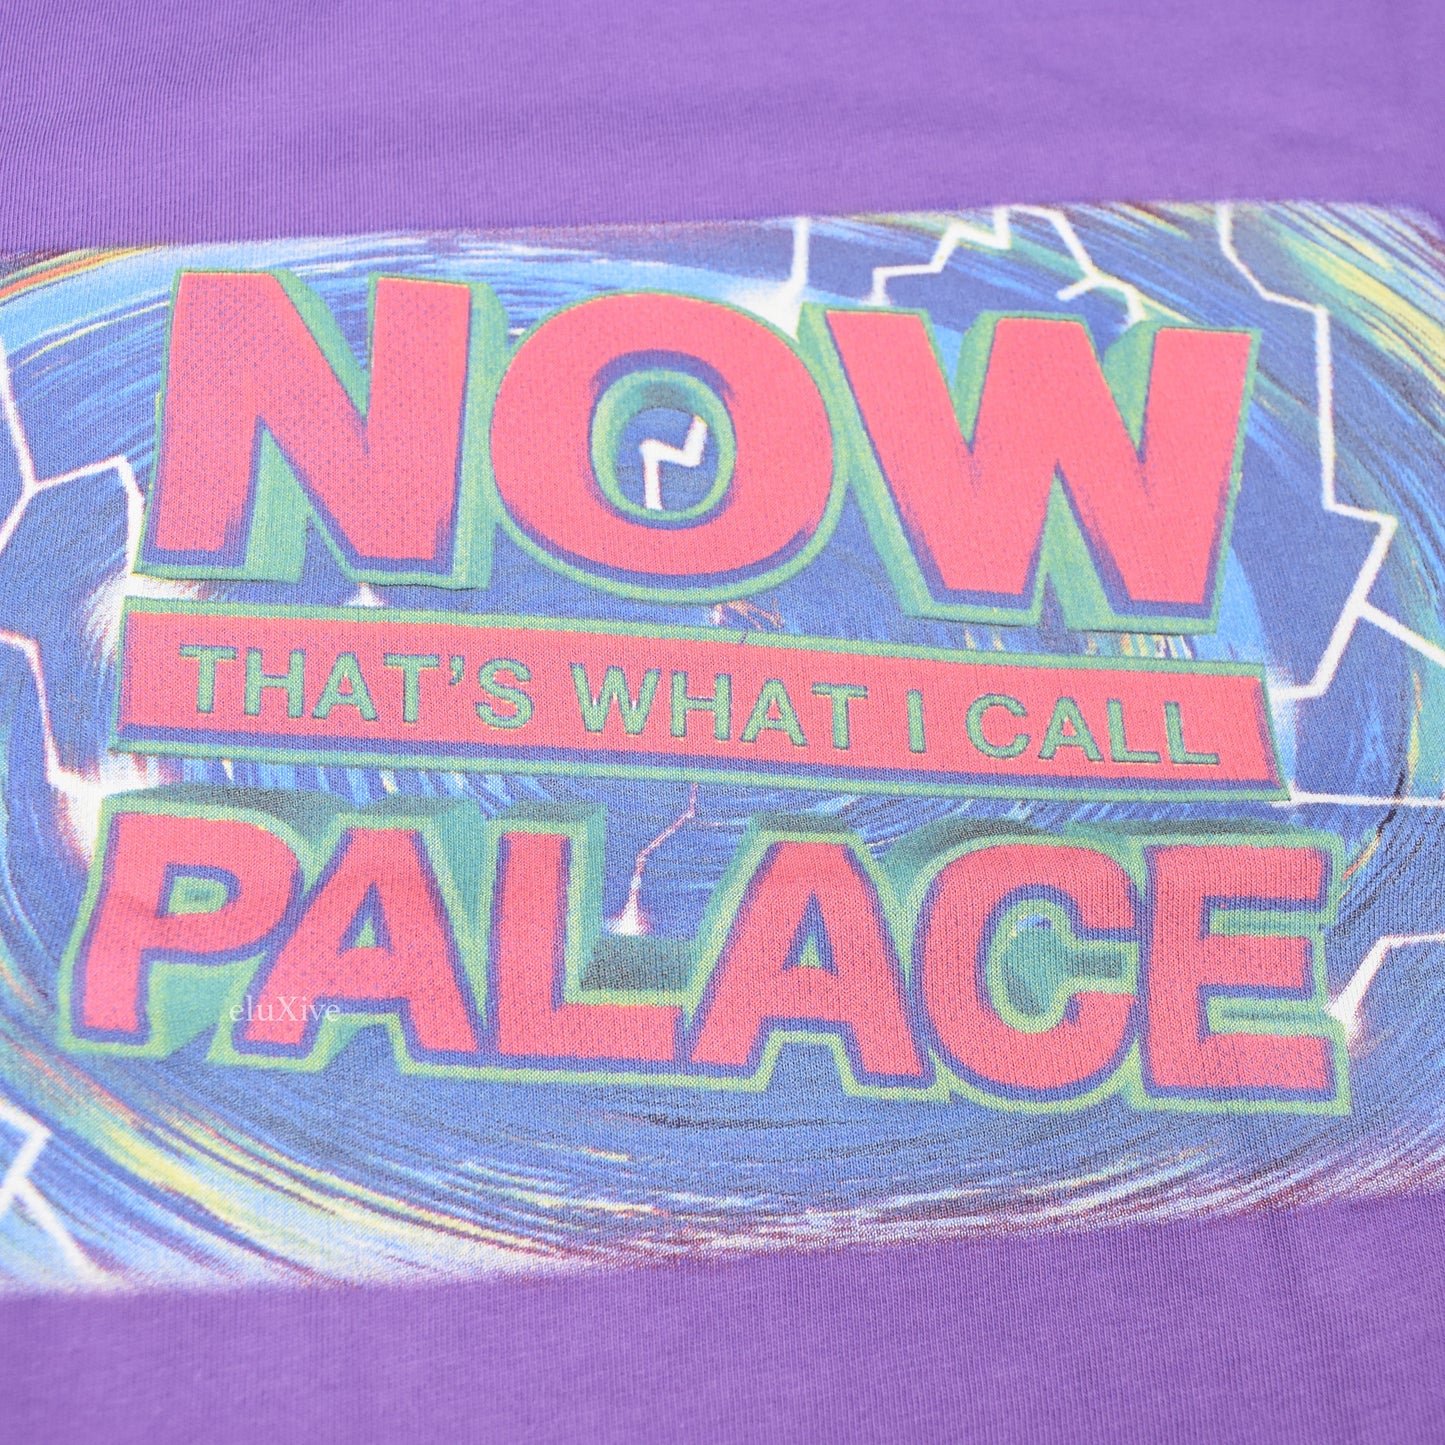 Palace - Now That's What Logo T-Shirt (Purple)